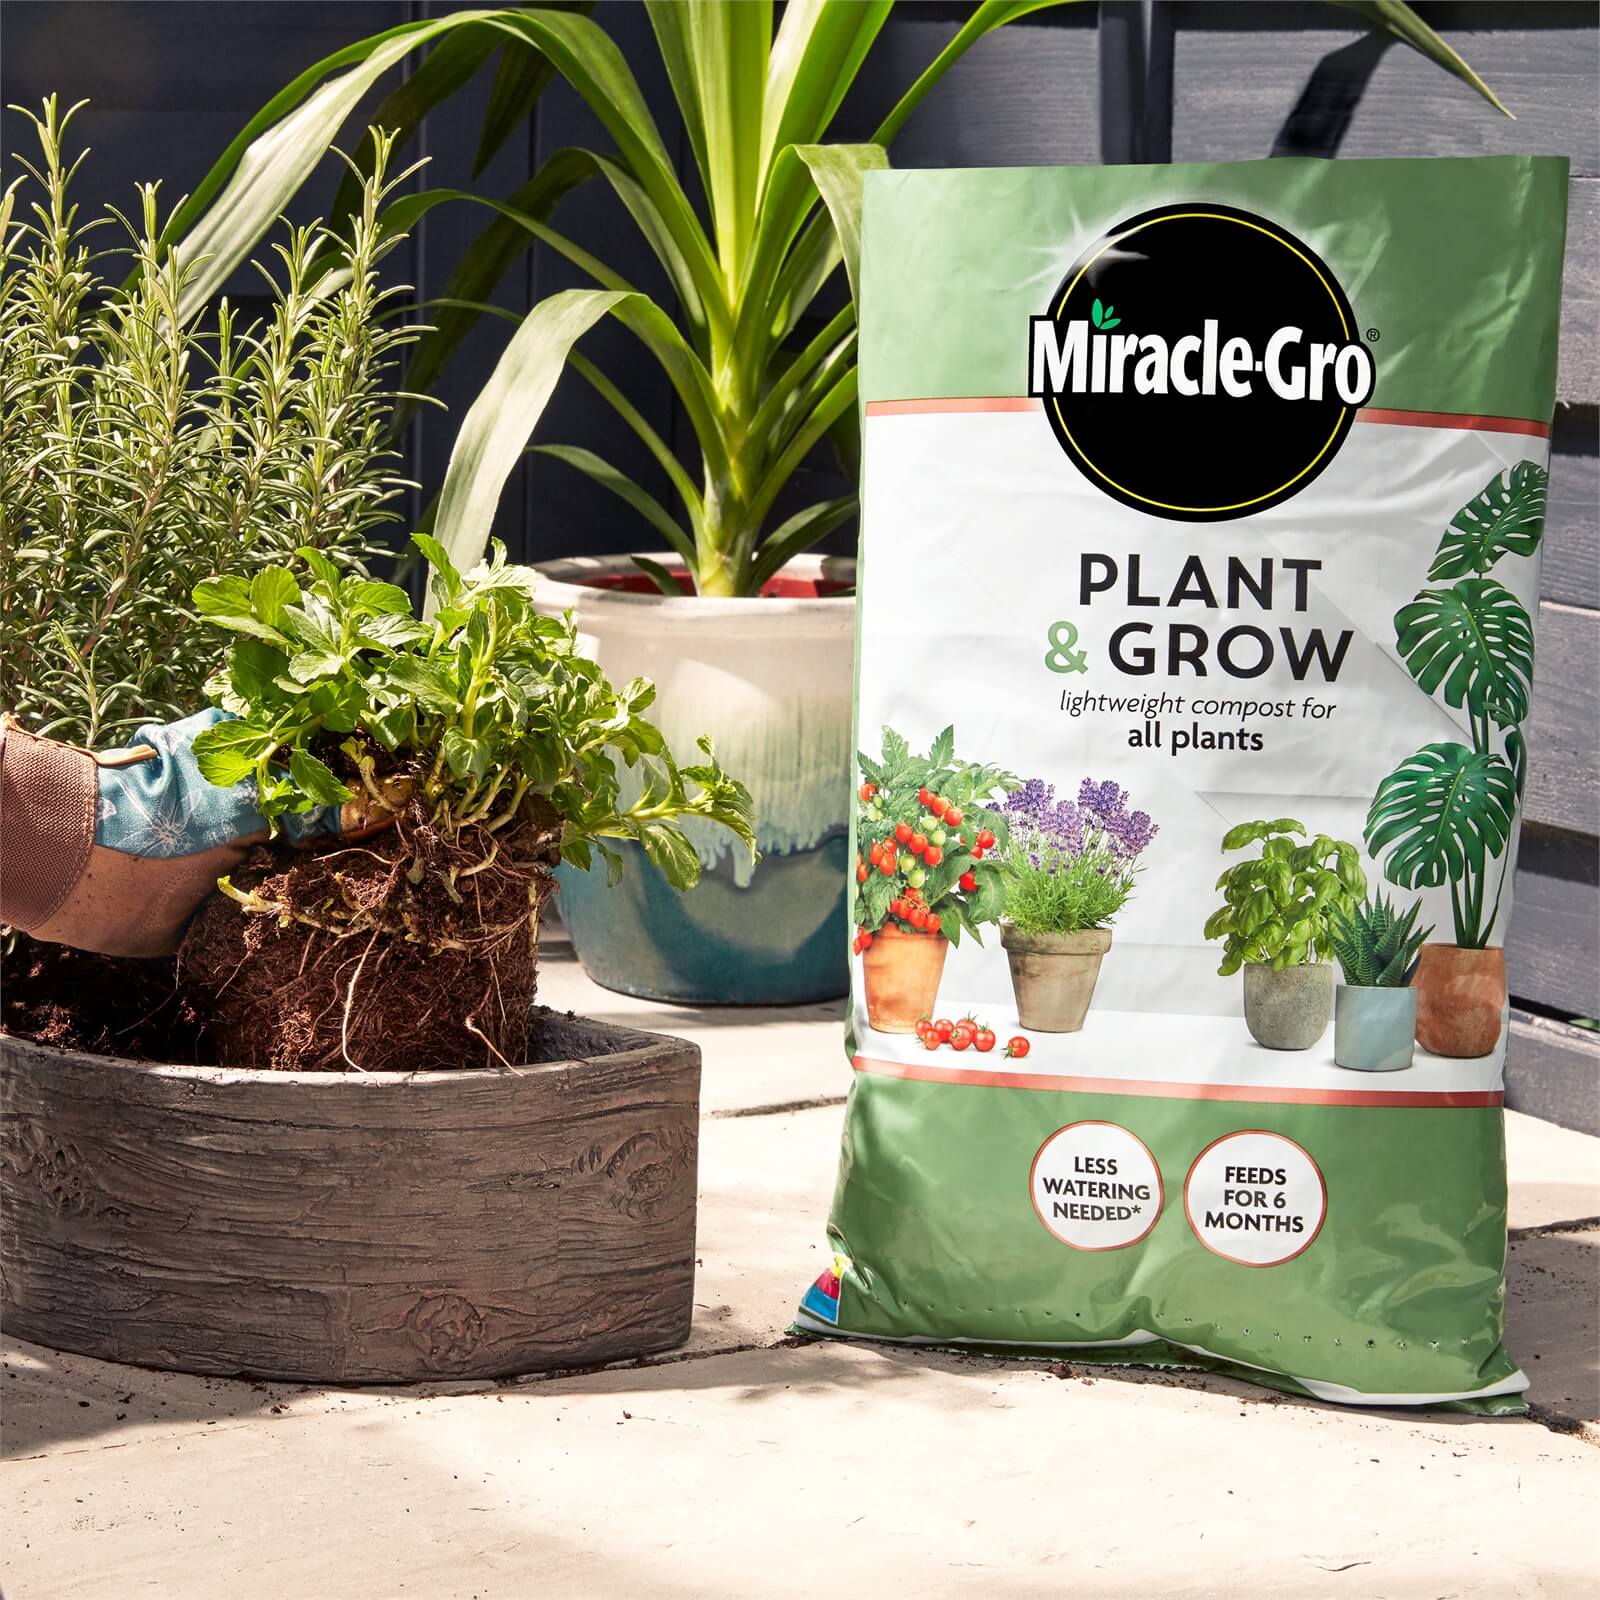 Miracle-Gro Plant & Grow Lightweight Compost for All Plants - 6L